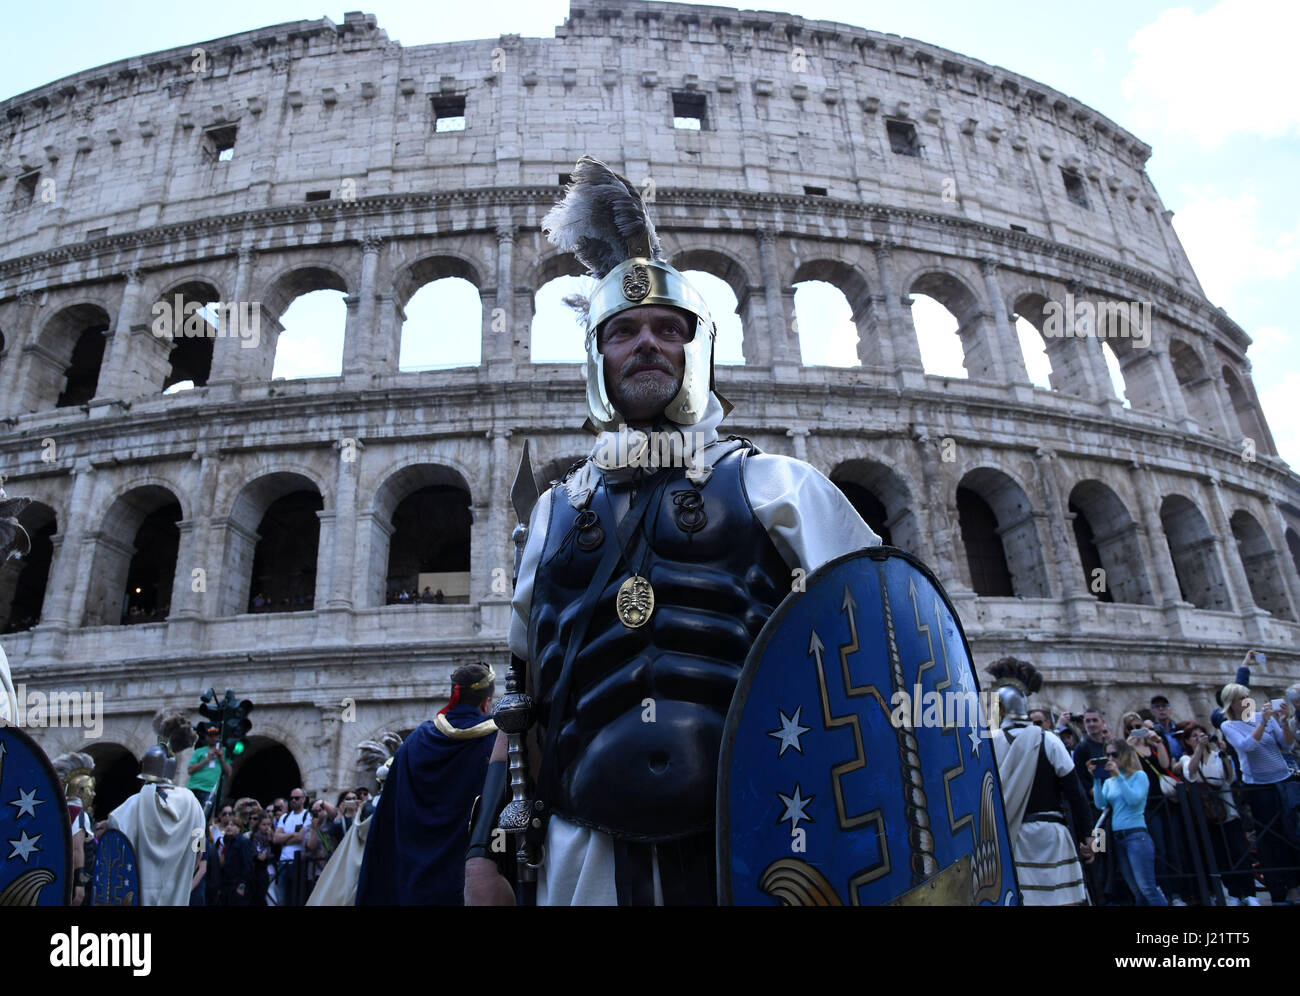 (170424) -- ROME, April 24, 2017 (Xinhua) -- Performers take part in a parade in Rome, capital of Italy, April 23, 2016. The city of Rome turned 2770 Friday after its legendary foundation by Romulus in 753 BC. People celebrate the Birth of Rome with parades in costume, re-enacting the deeds of the great ancient Roman Empire, along the ancient Roman ruins of the Colosseum, Circus Maximus, Roman Forum and Venice Square. (Xinhua/Alberto Lingria) (zy) Stock Photo